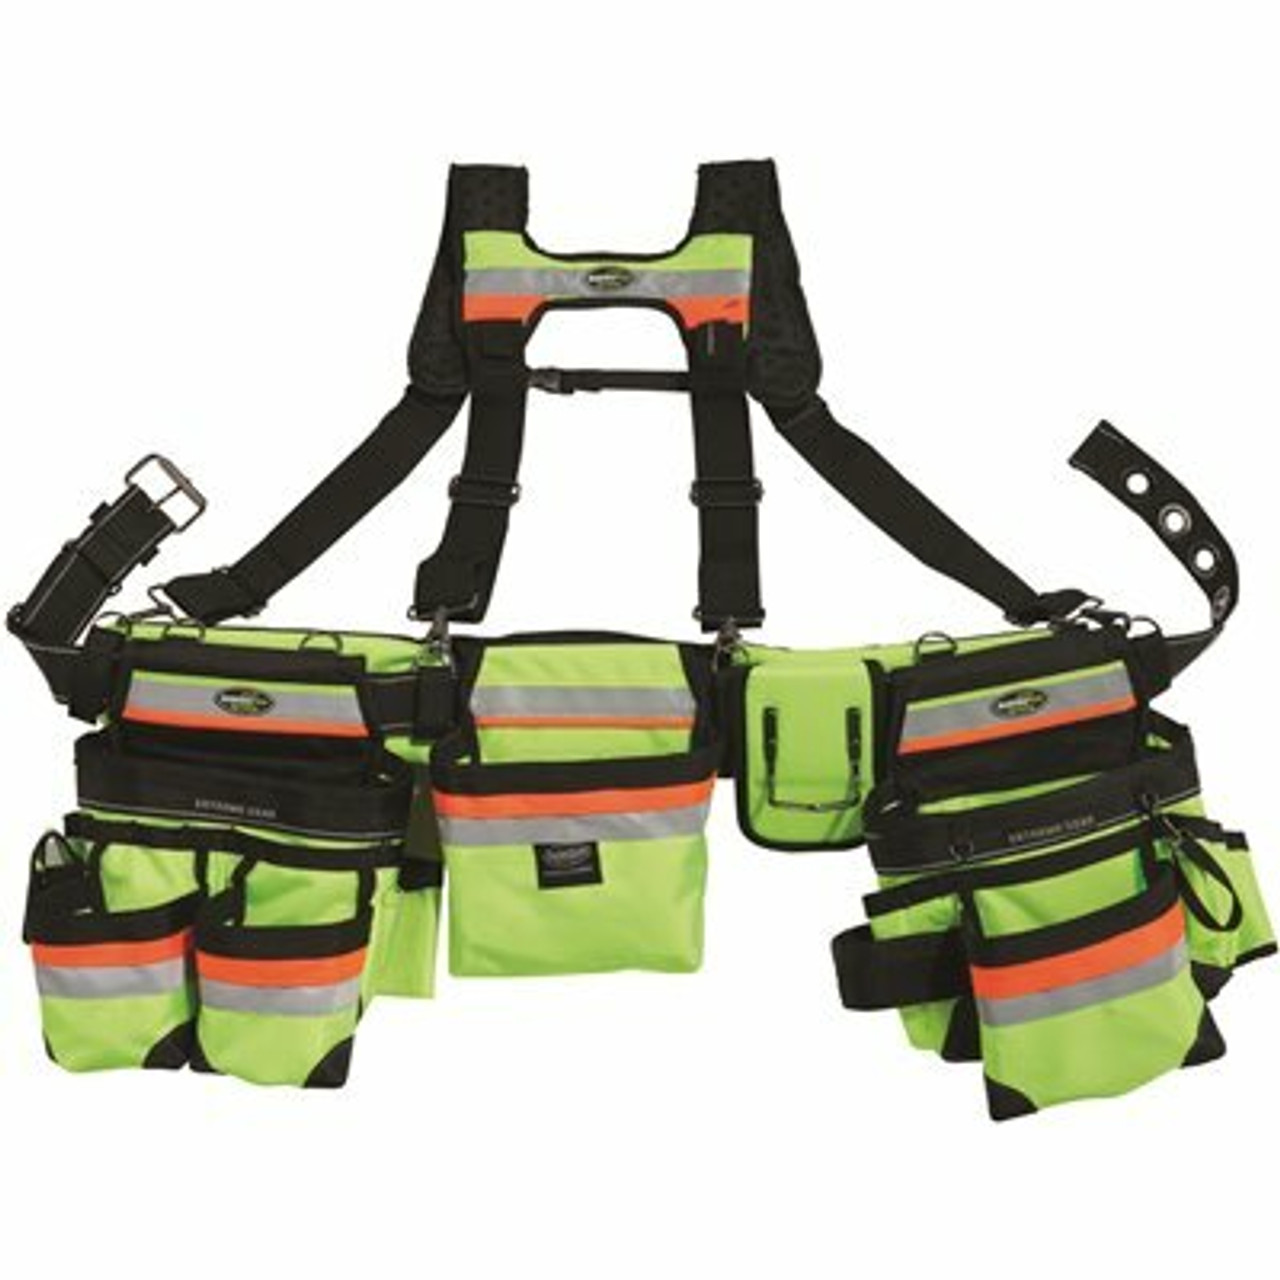 Bucket Boss Hi-Visibility 3-Bag Framer'S Tool Belt With Suspenders Suspension Rig With 29-Pockets